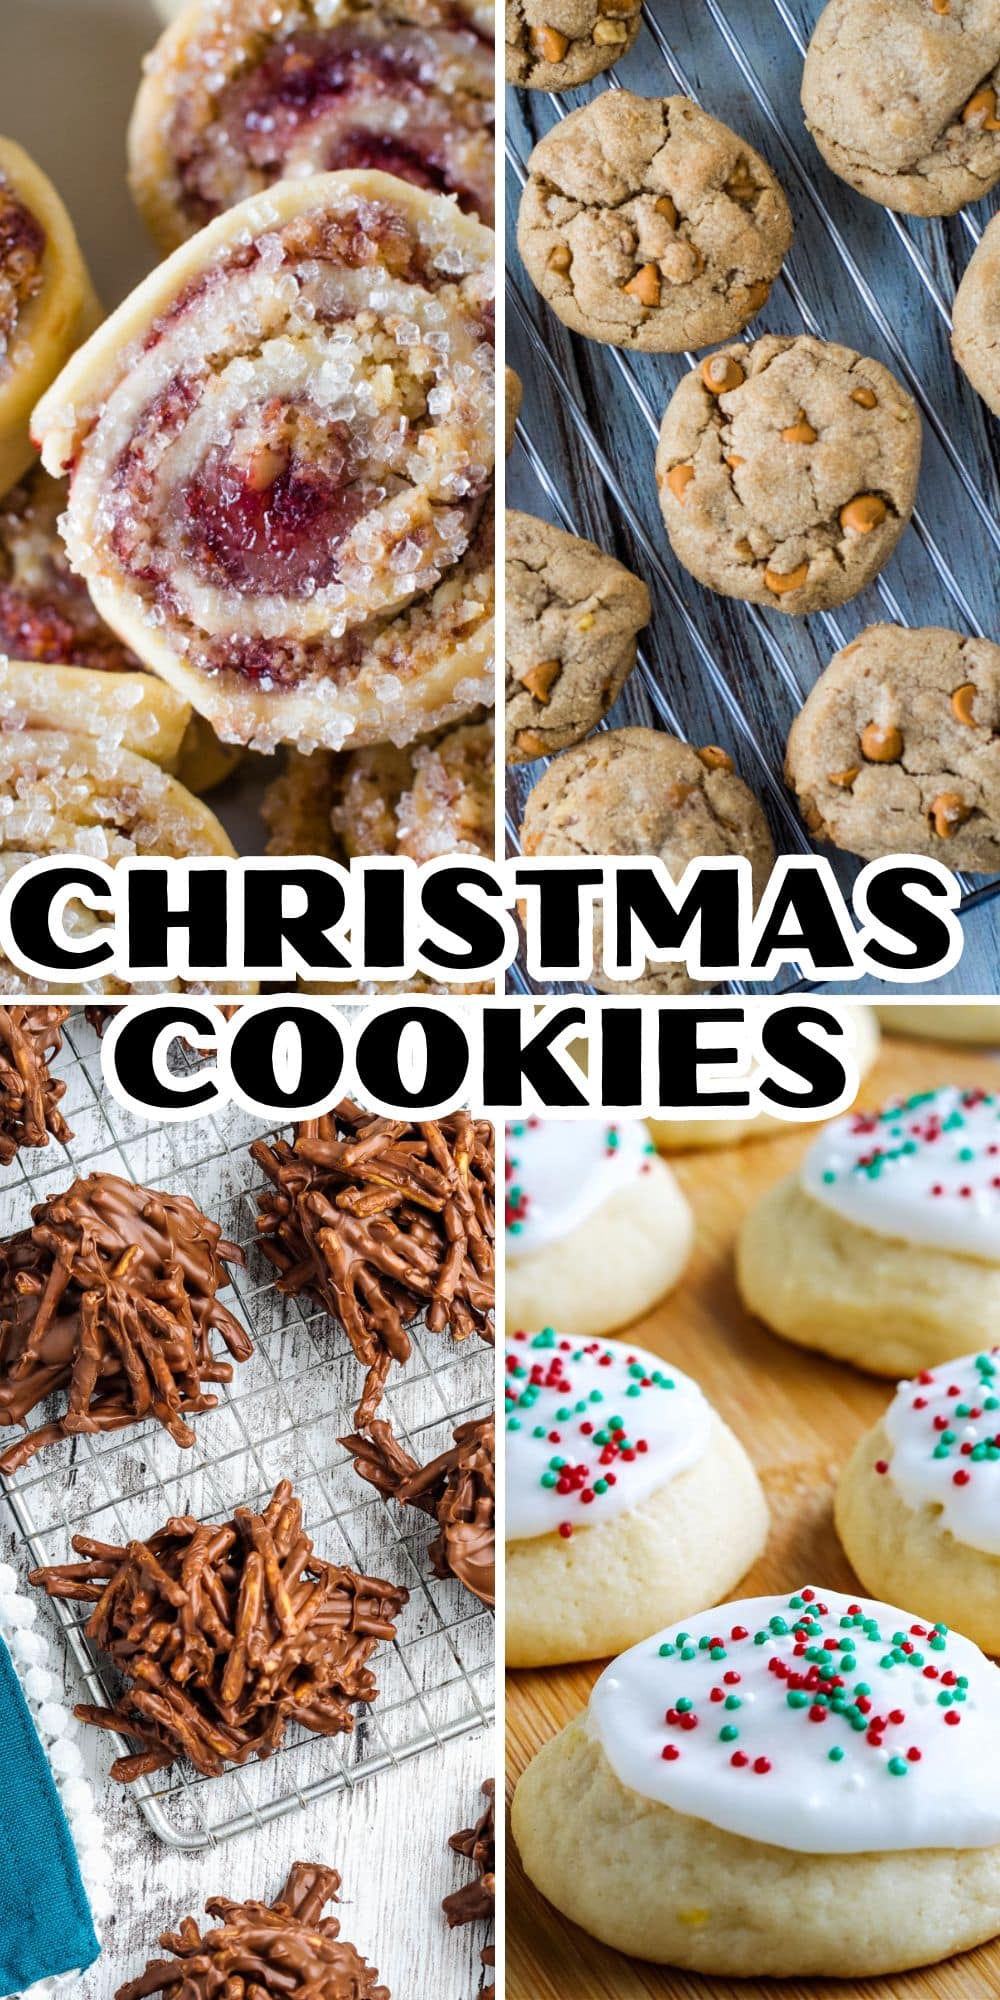 A festive assortment of mouthwatering Christmas cookies, artfully arranged in a delightful collage.